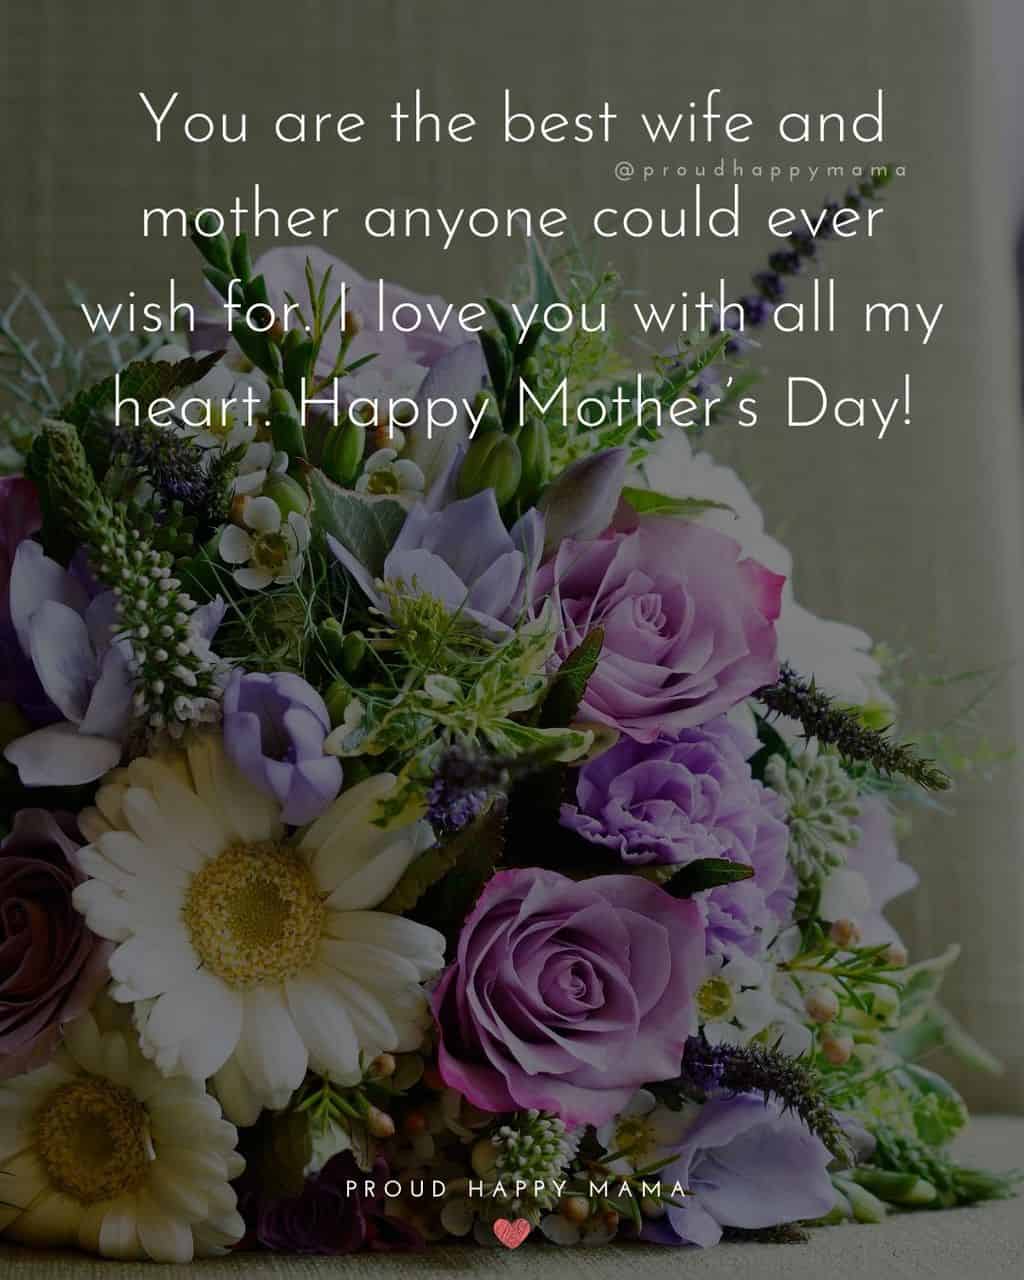 Happy Mothers Day Quotes For Wife - You are the best wife and mother anyone could ever wish for. I love you with all my heart.